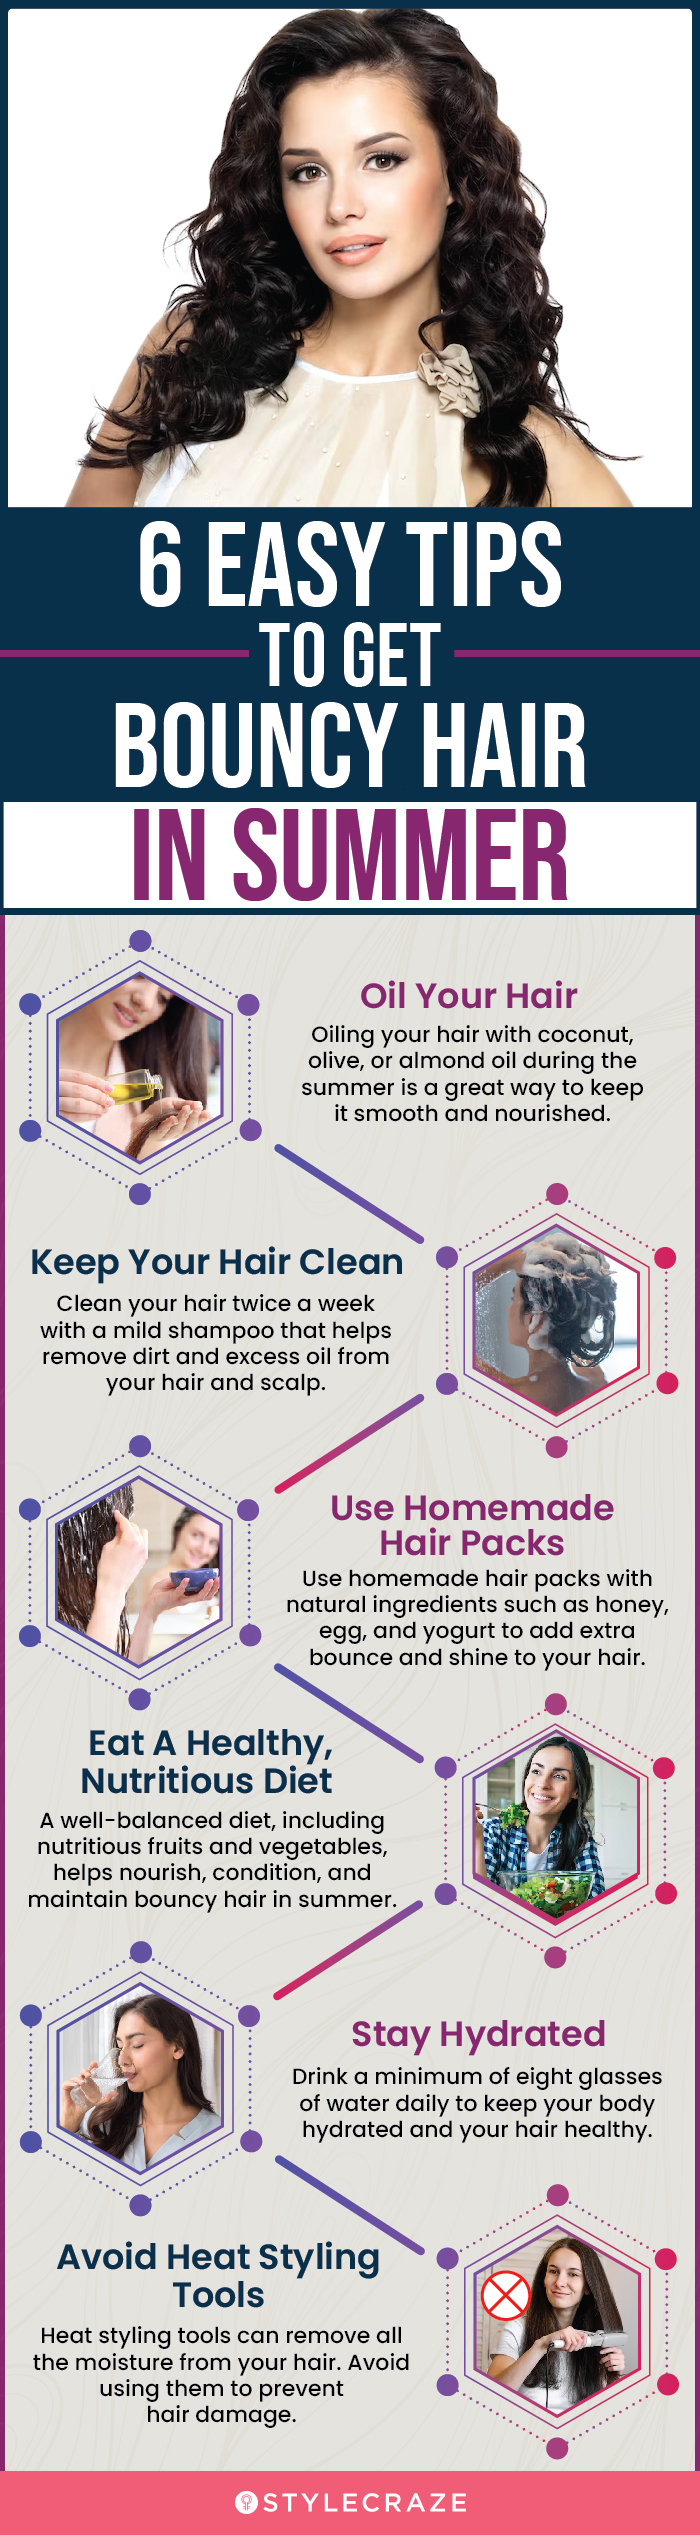 6 easy tips to get bouncy hair in summer (infographic)